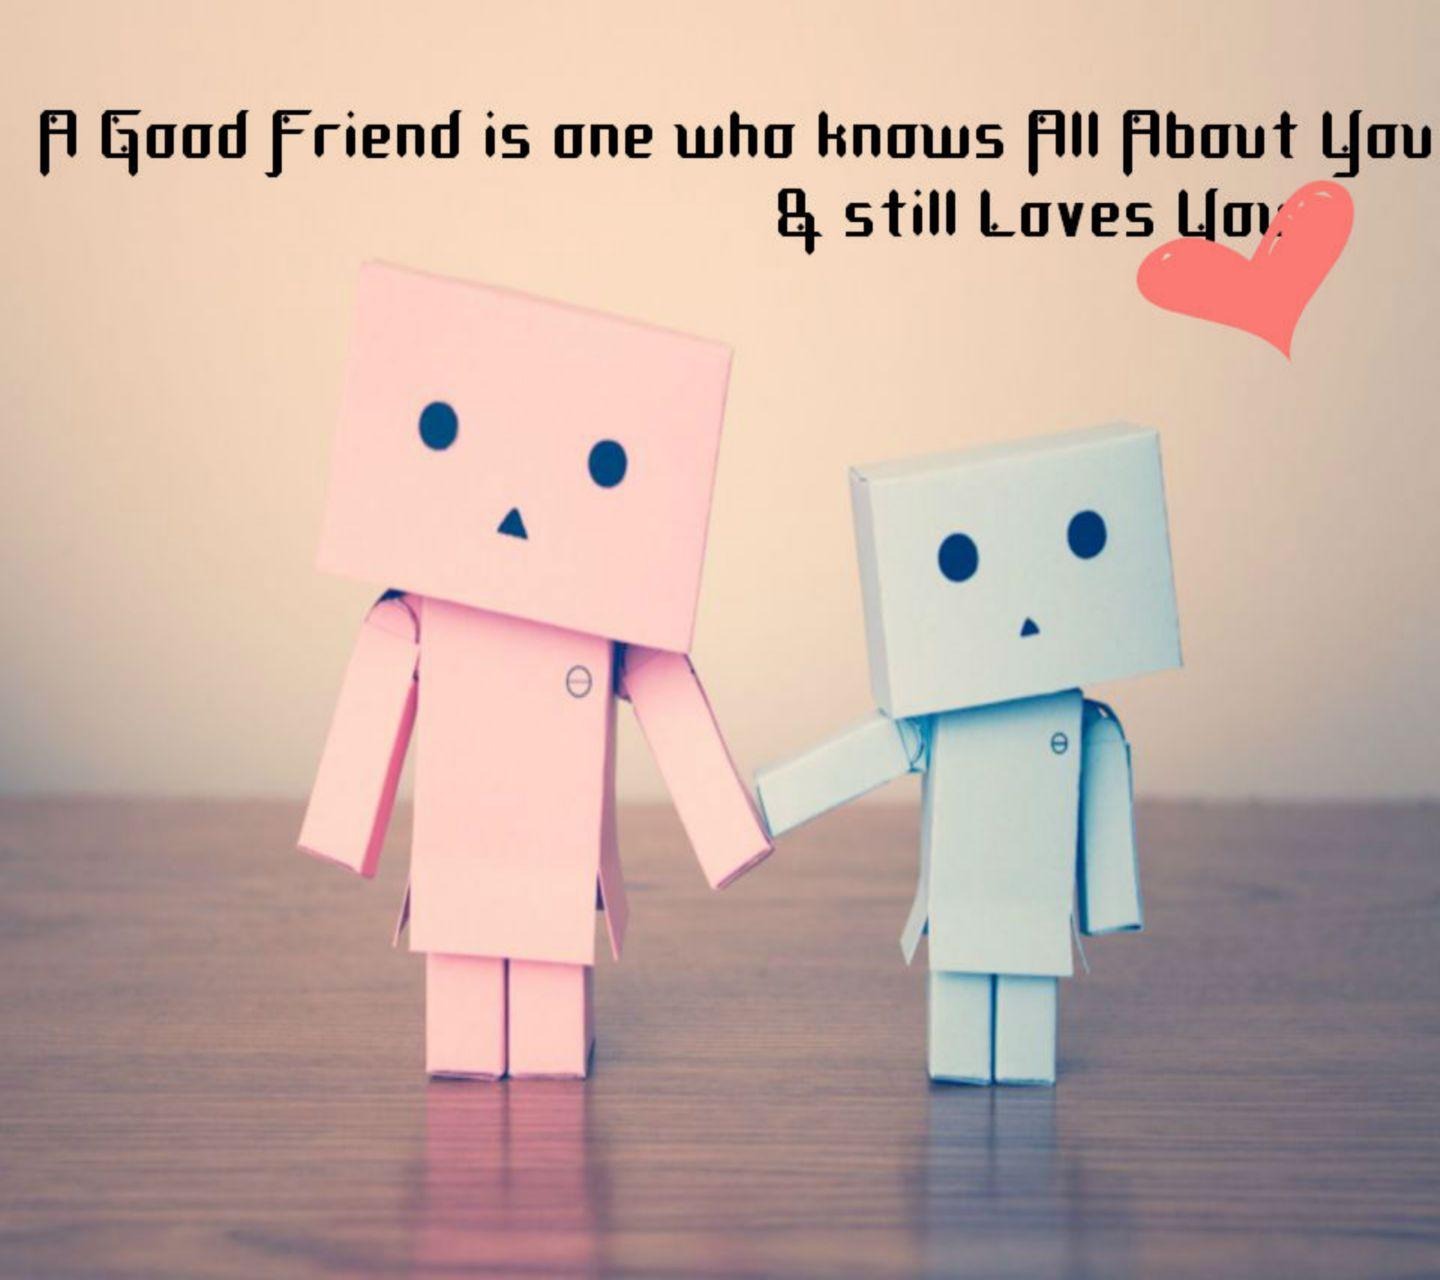 Friendship Wallpaper Android Apps on Google Play. wallpaper